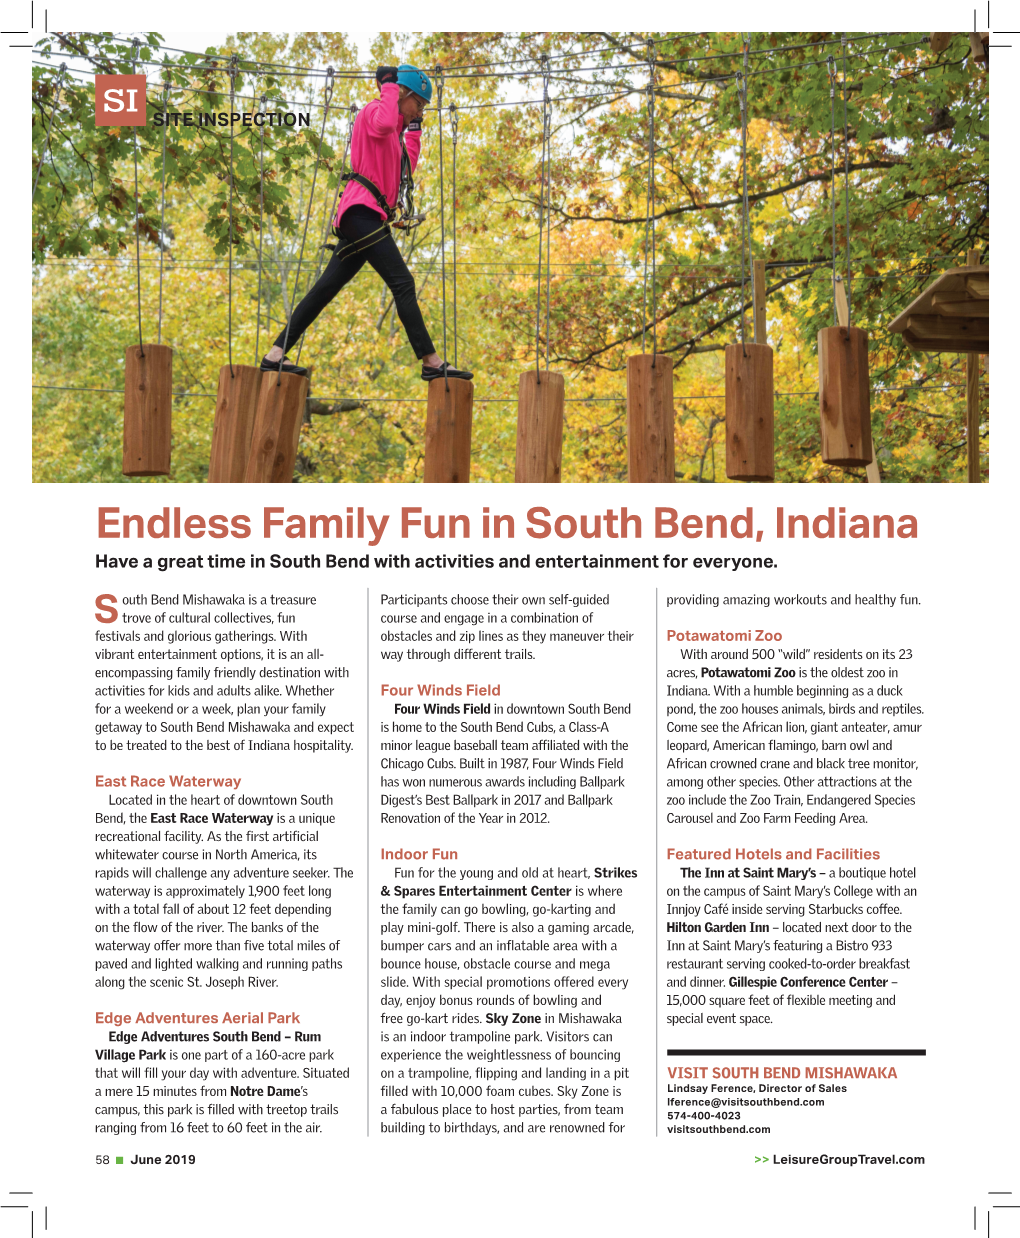 Endless Family Fun in South Bend, Indiana Have a Great Time in South Bend with Activities and Entertainment for Everyone